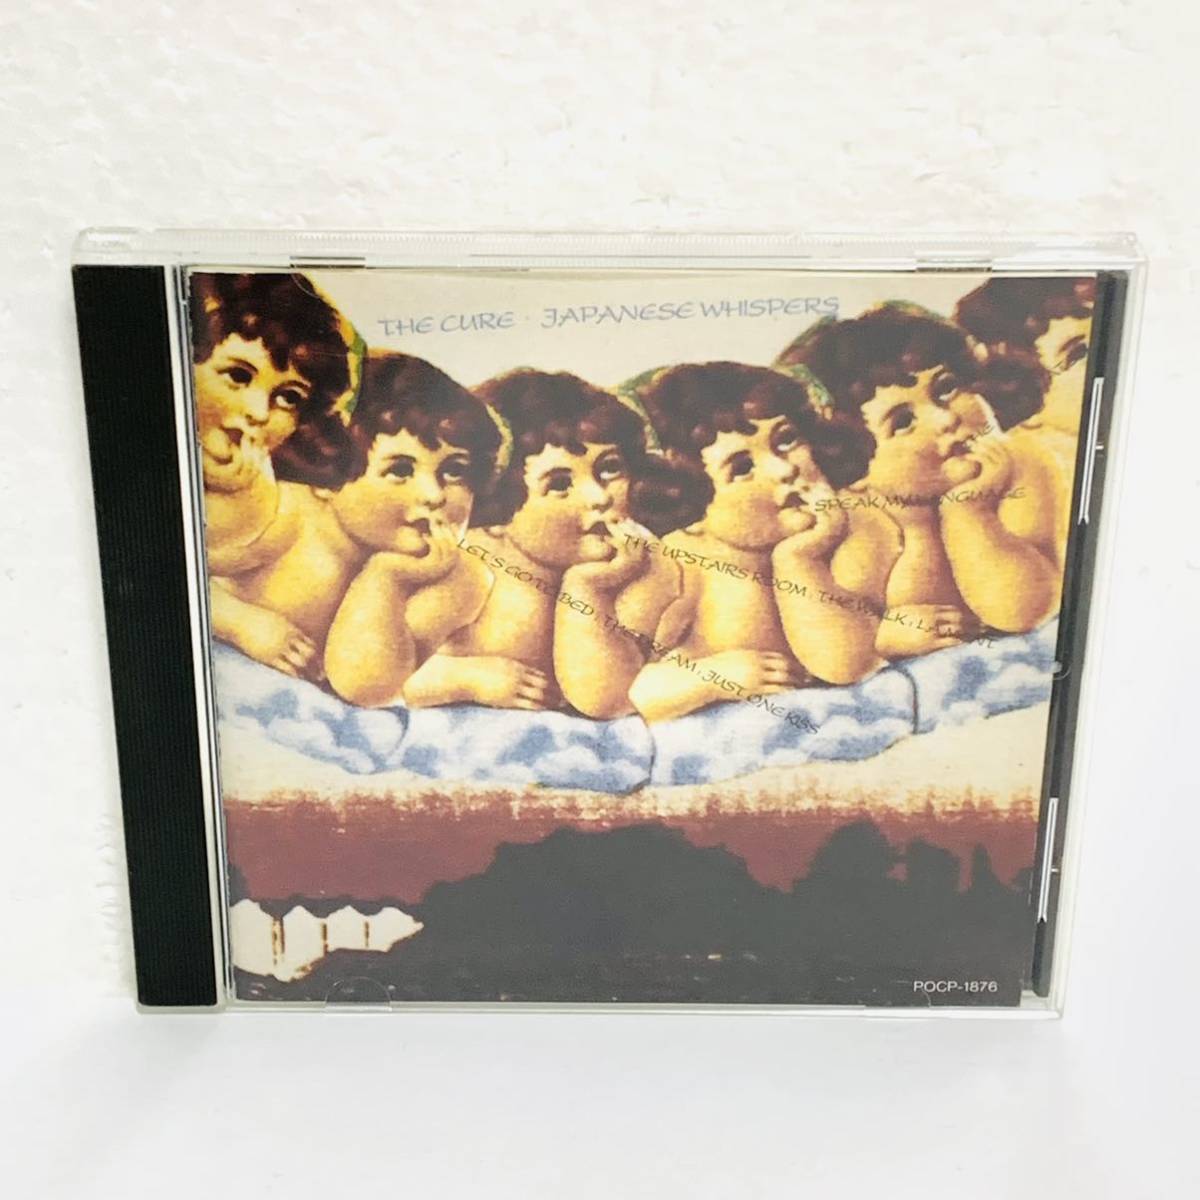 THE CURE　ザ・キュアー　JAPANESE WHISPERS　日本人の囁き　洋楽　CD　60202ss_画像1